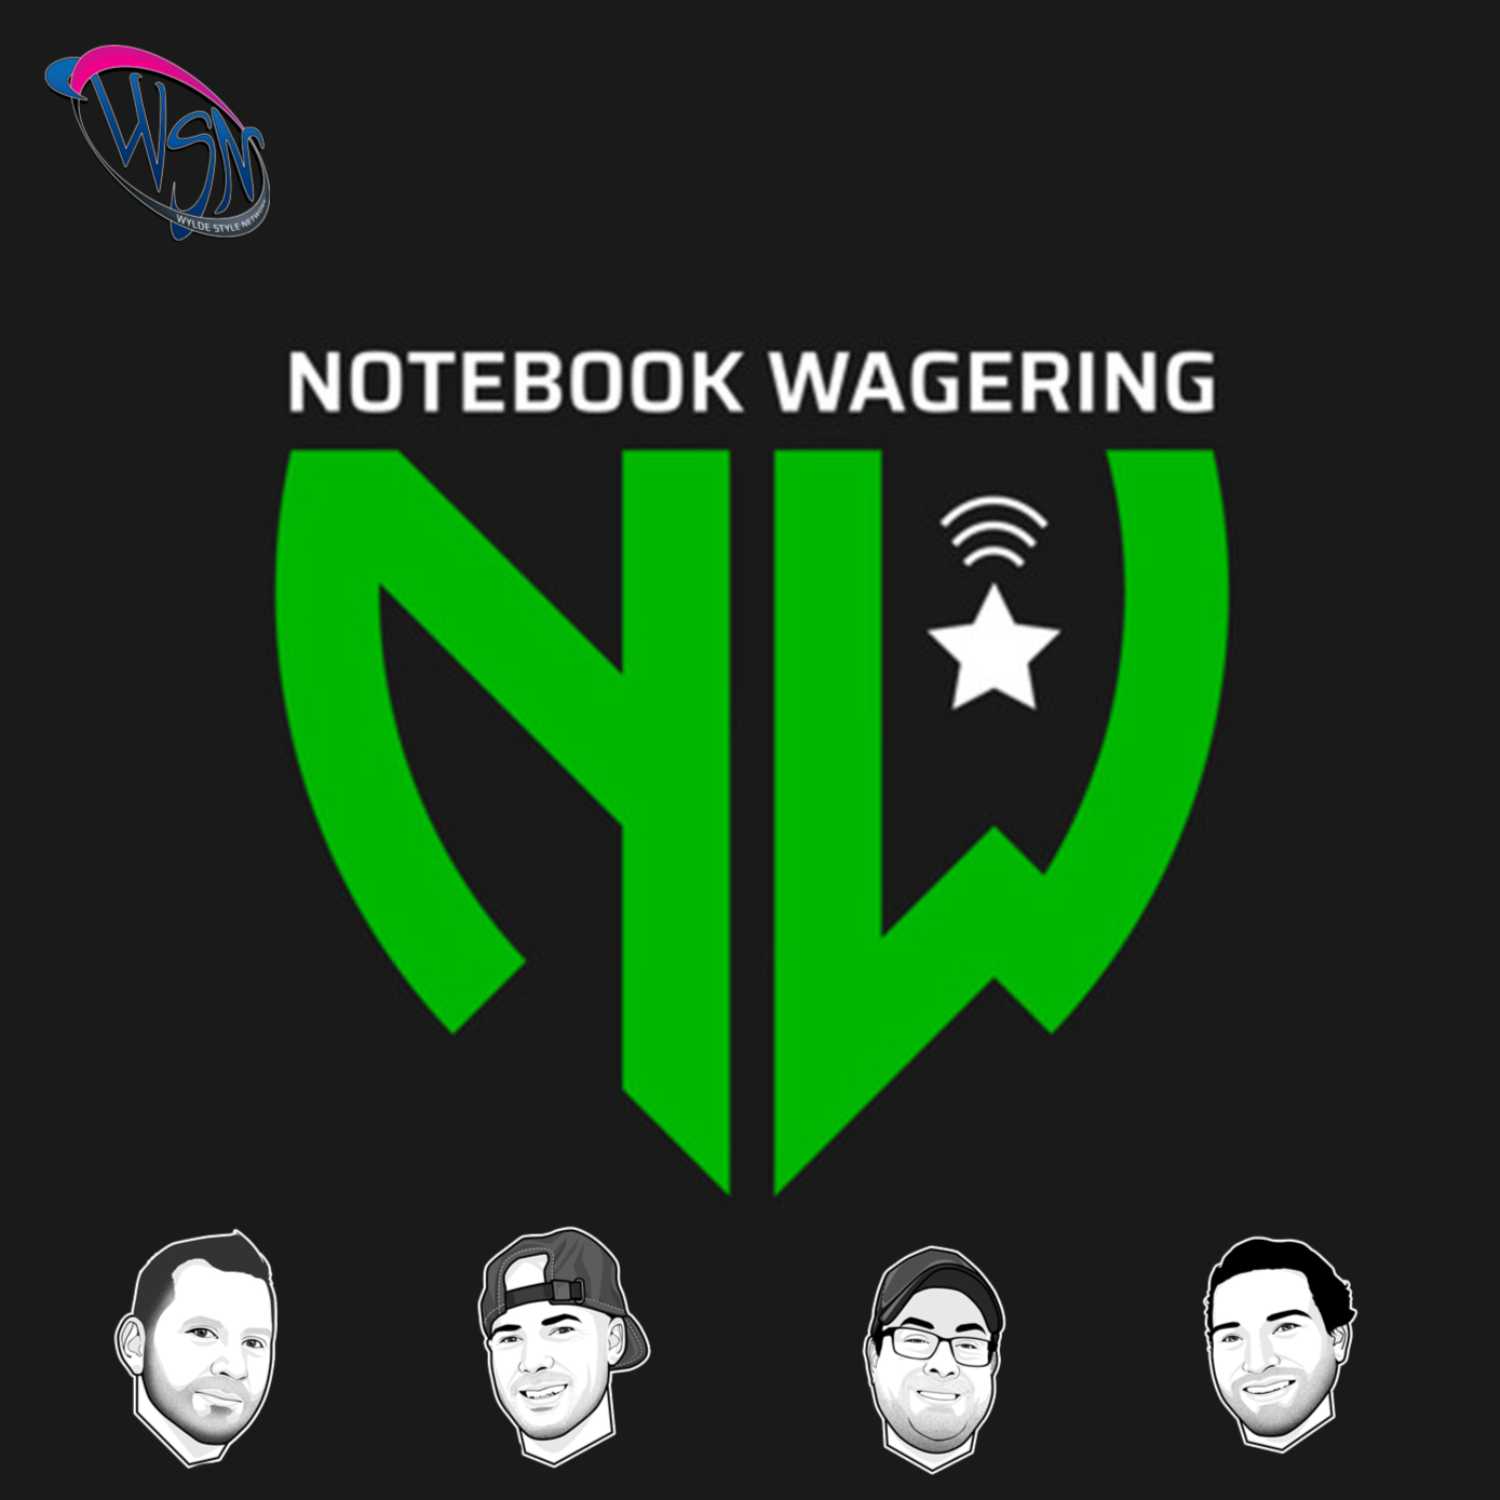 Doug Whaley, XFL SVP Interview | Notebook Wagering | Wylde Style Network...Fueled by Monster Energy